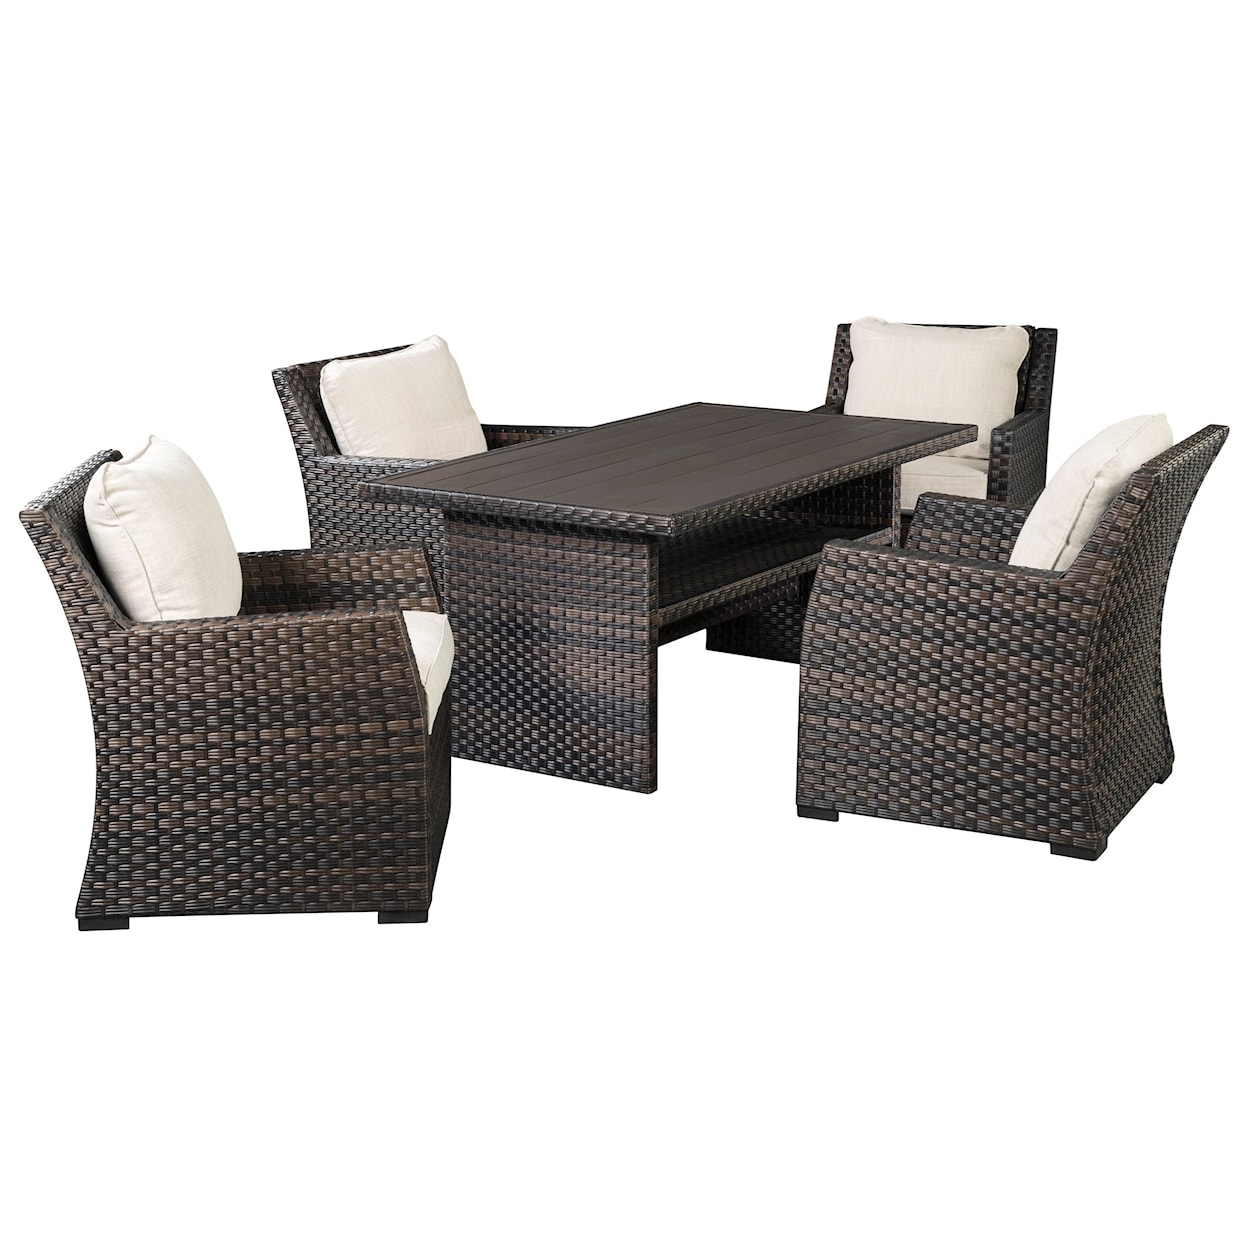 Signature Design by Ashley Easy Isle Multi-Use Table & 4 Lounge Chairs